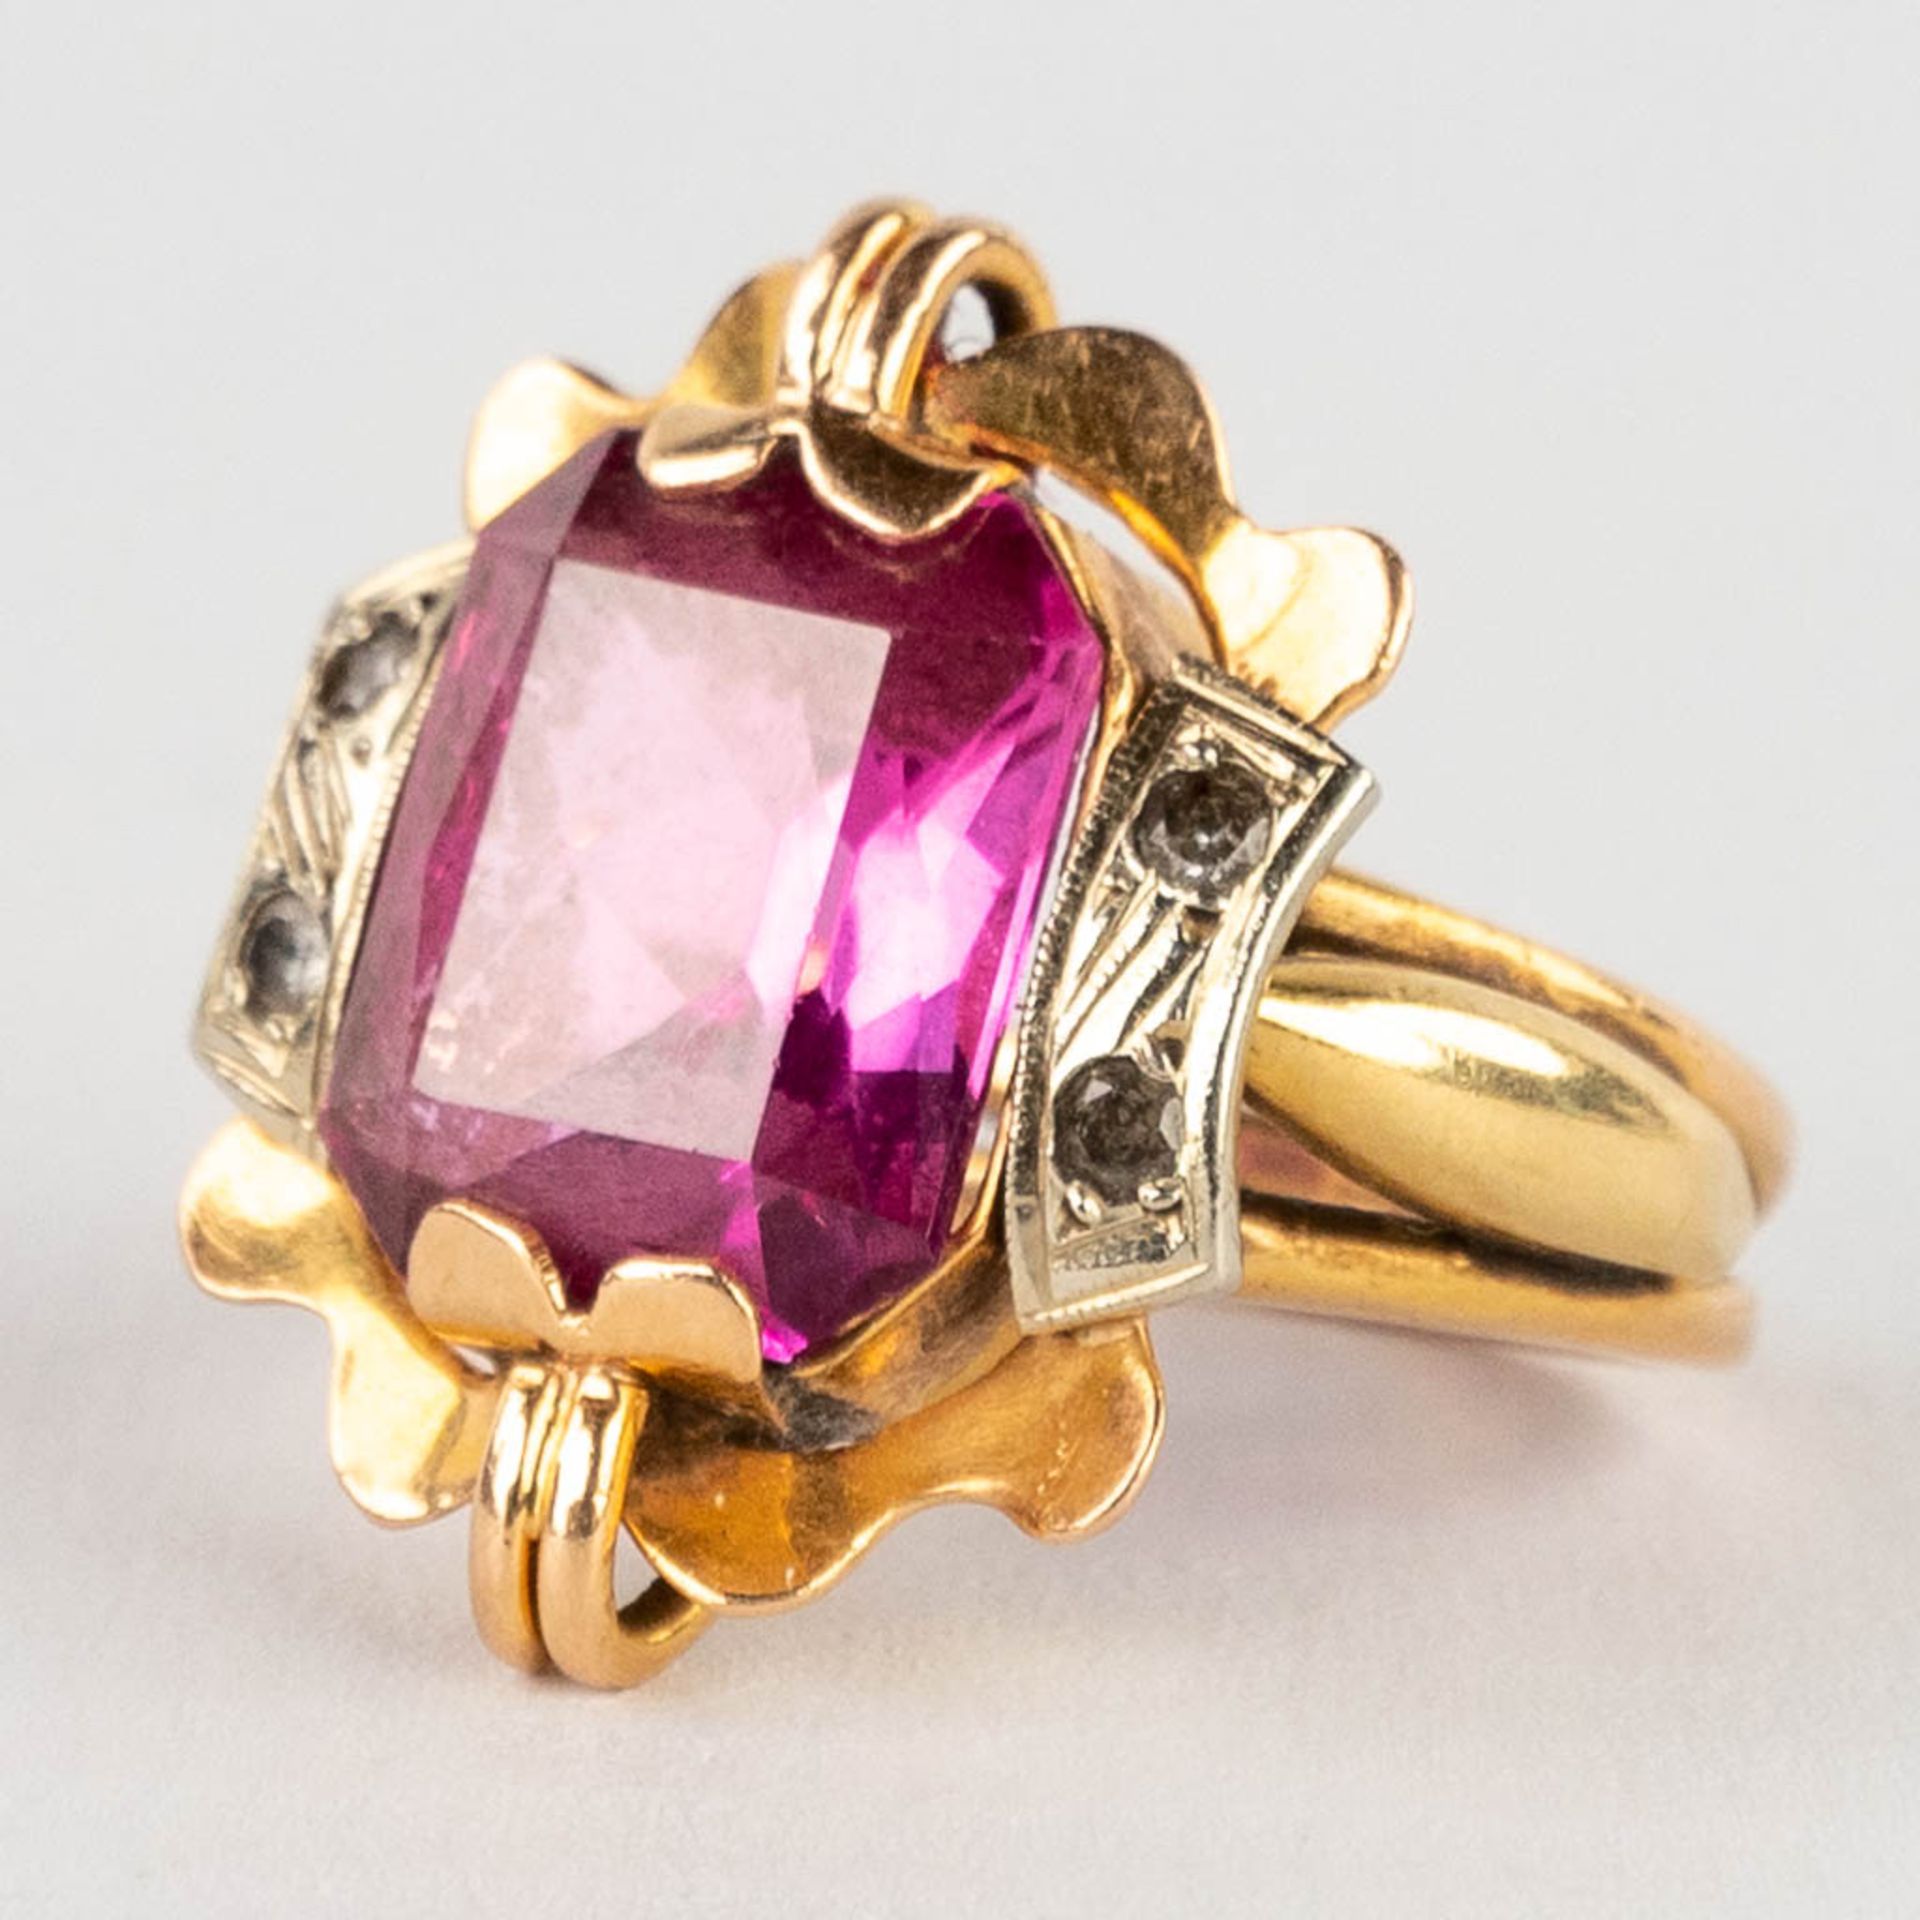 A yellow gold ring with a cut light purple stone/glass. 6,87g. Ring size: 52. - Image 4 of 9